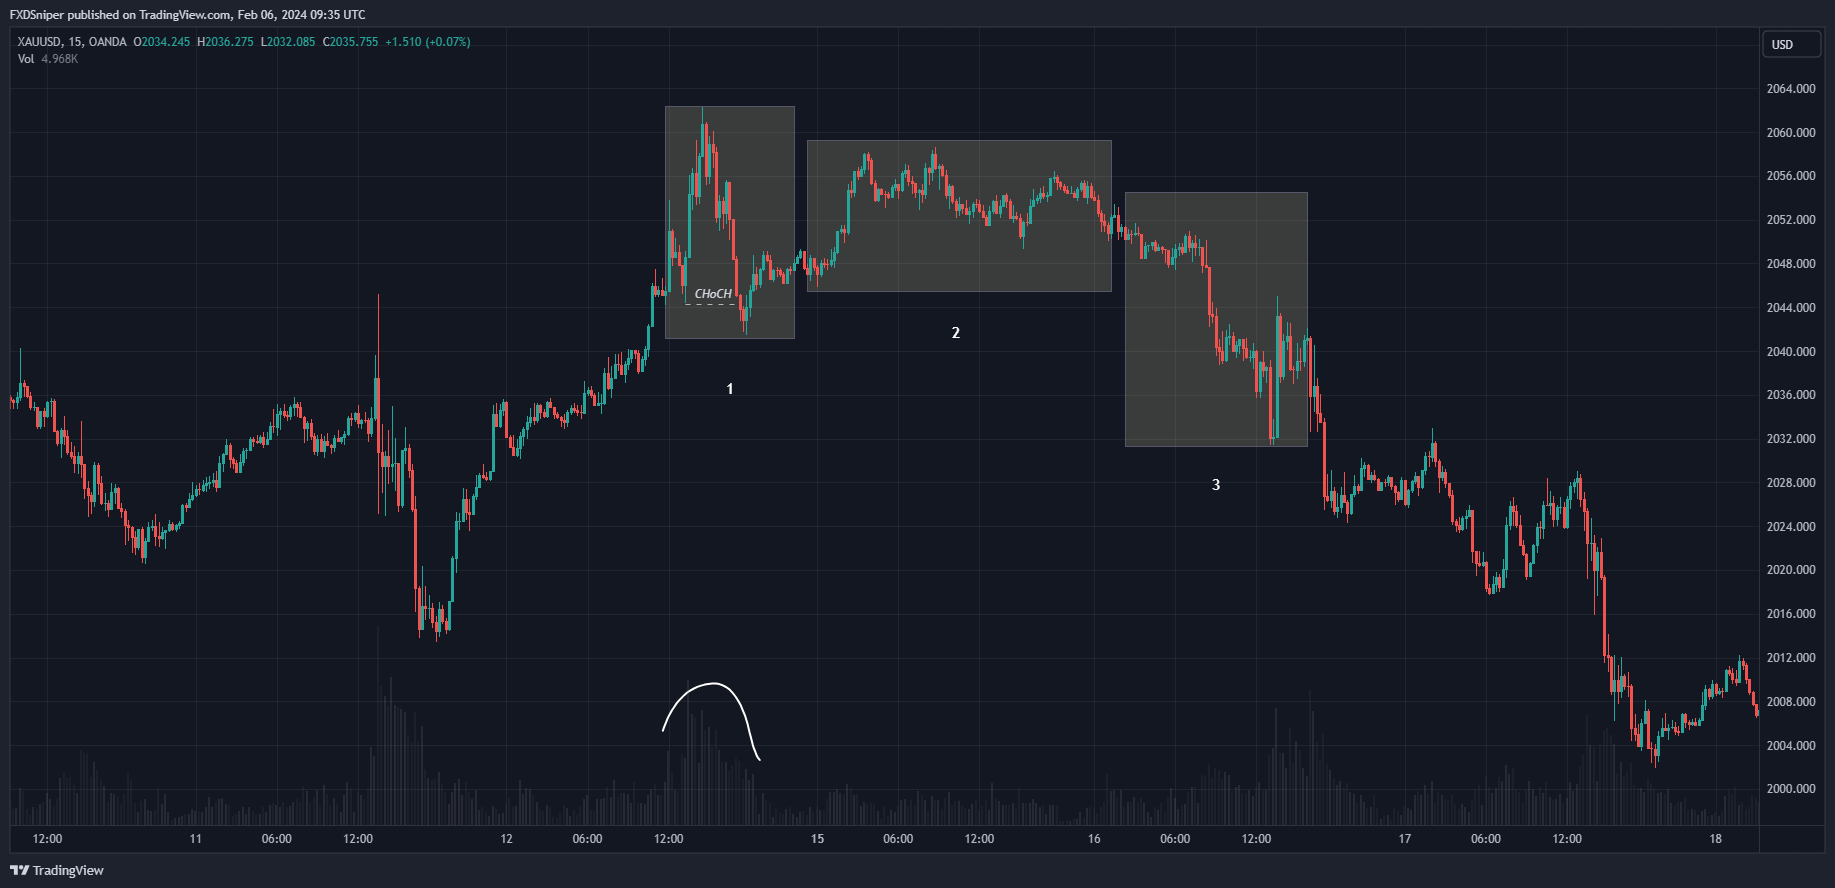 Which box gives us confirmation of reversal?